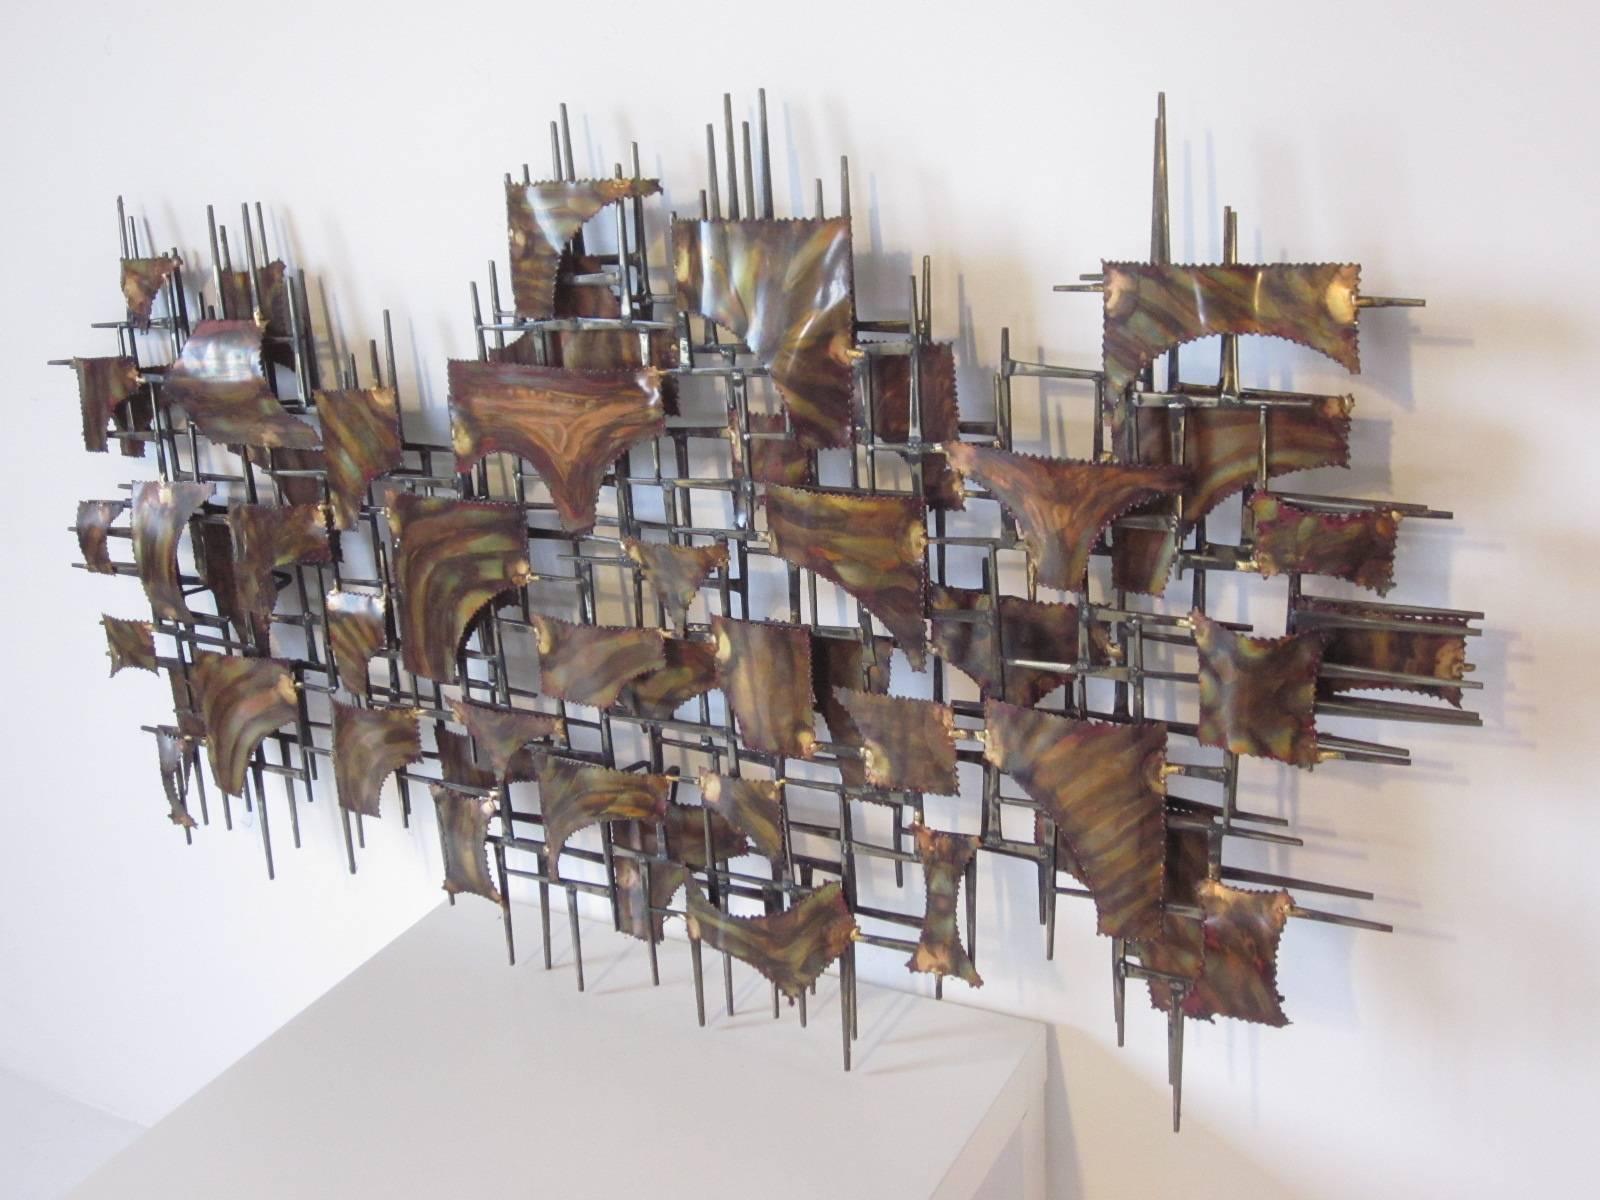 A torch cut, flamed and welded large metal wall sculpture in copper and brass tones contemporary in design with built in rear wall hangers so it can be displayed vertically or horizontally. In the manner of artist Silas Seandel.